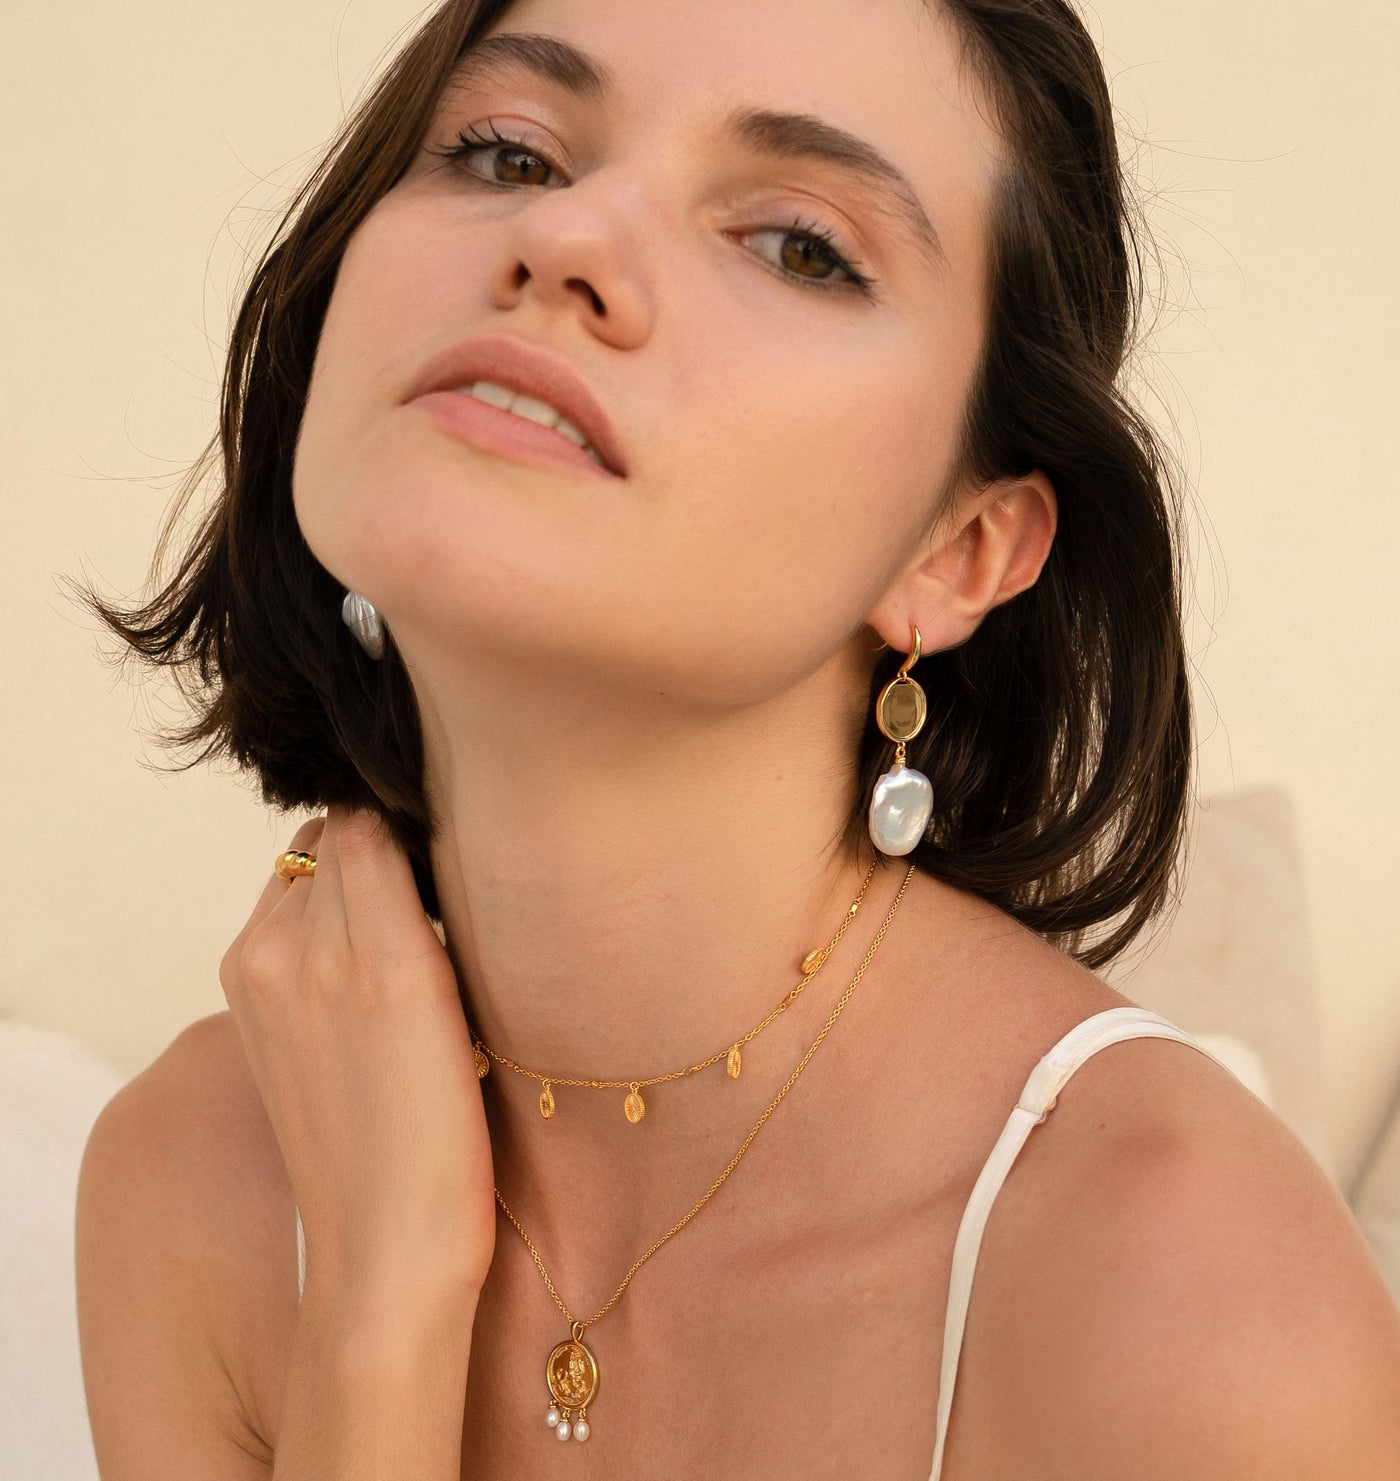 Model wearing gold engraved horse coin pendant necklace with hanging freshwater pearls with coin choker with CZ crystals and freshwater pearl and coin drop earrings